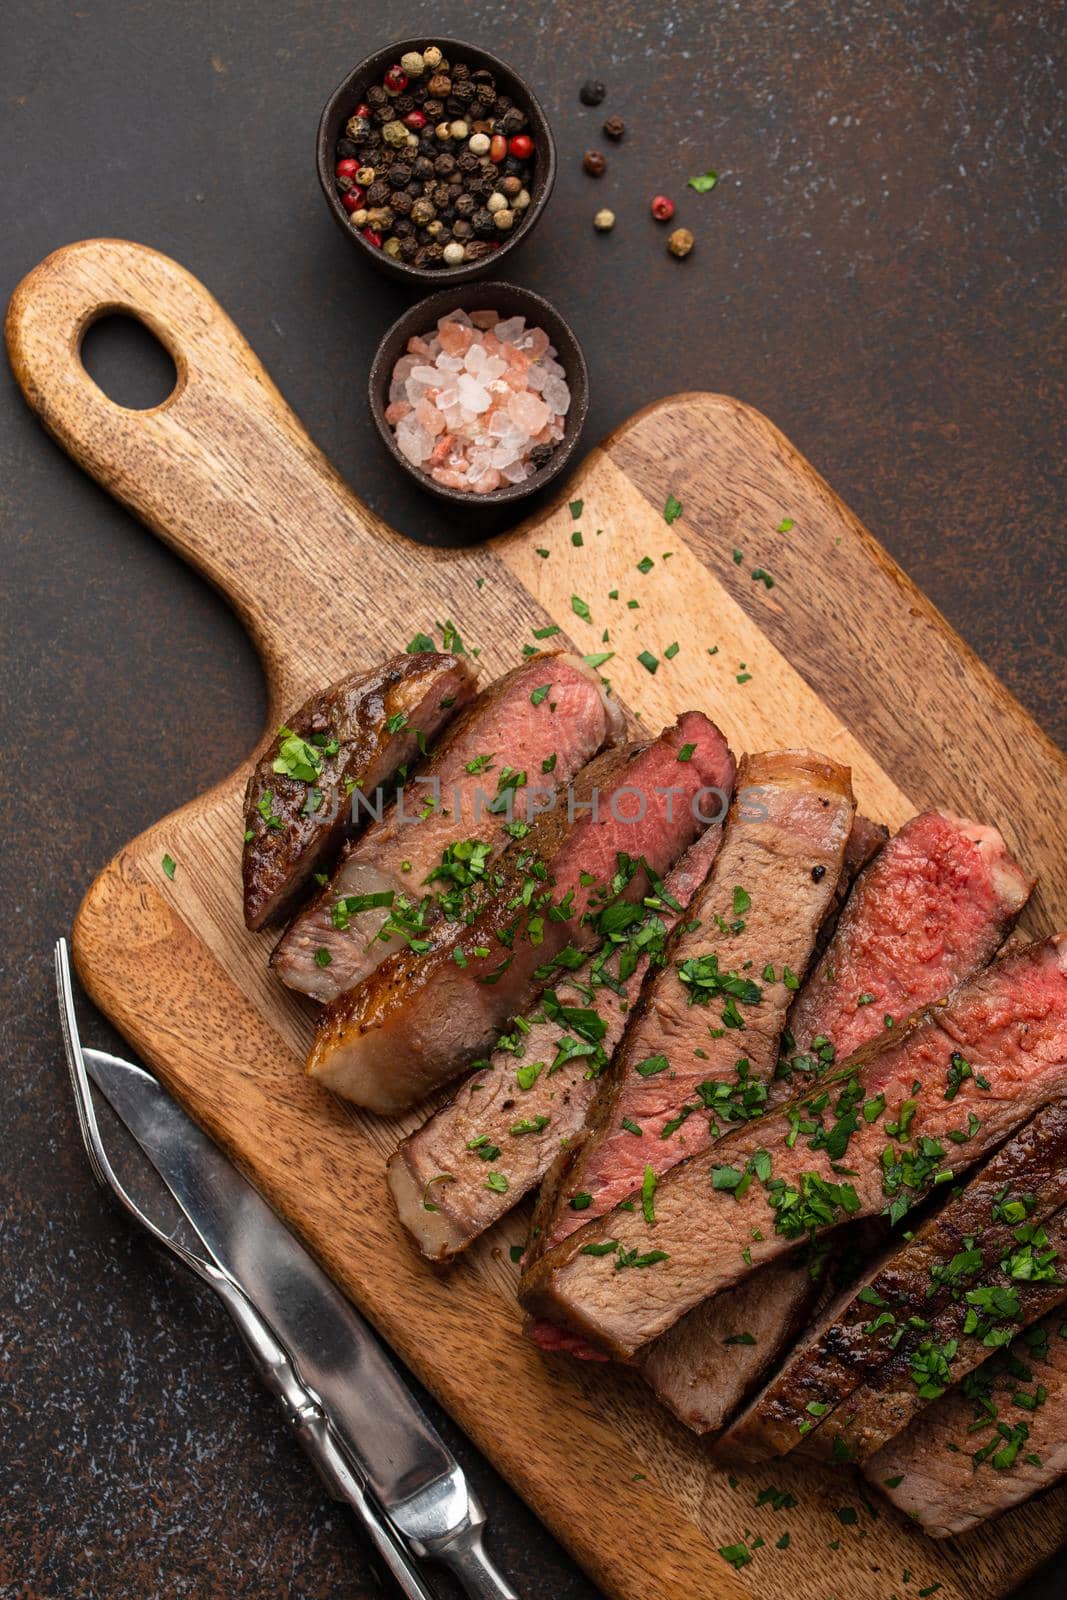 Grilled or fried prime marbled meat steak Ribeye sliced and served on wooden cutting board with cutlery. Top view of juicy cooked beef steak cut in slices on rustic brown concrete background